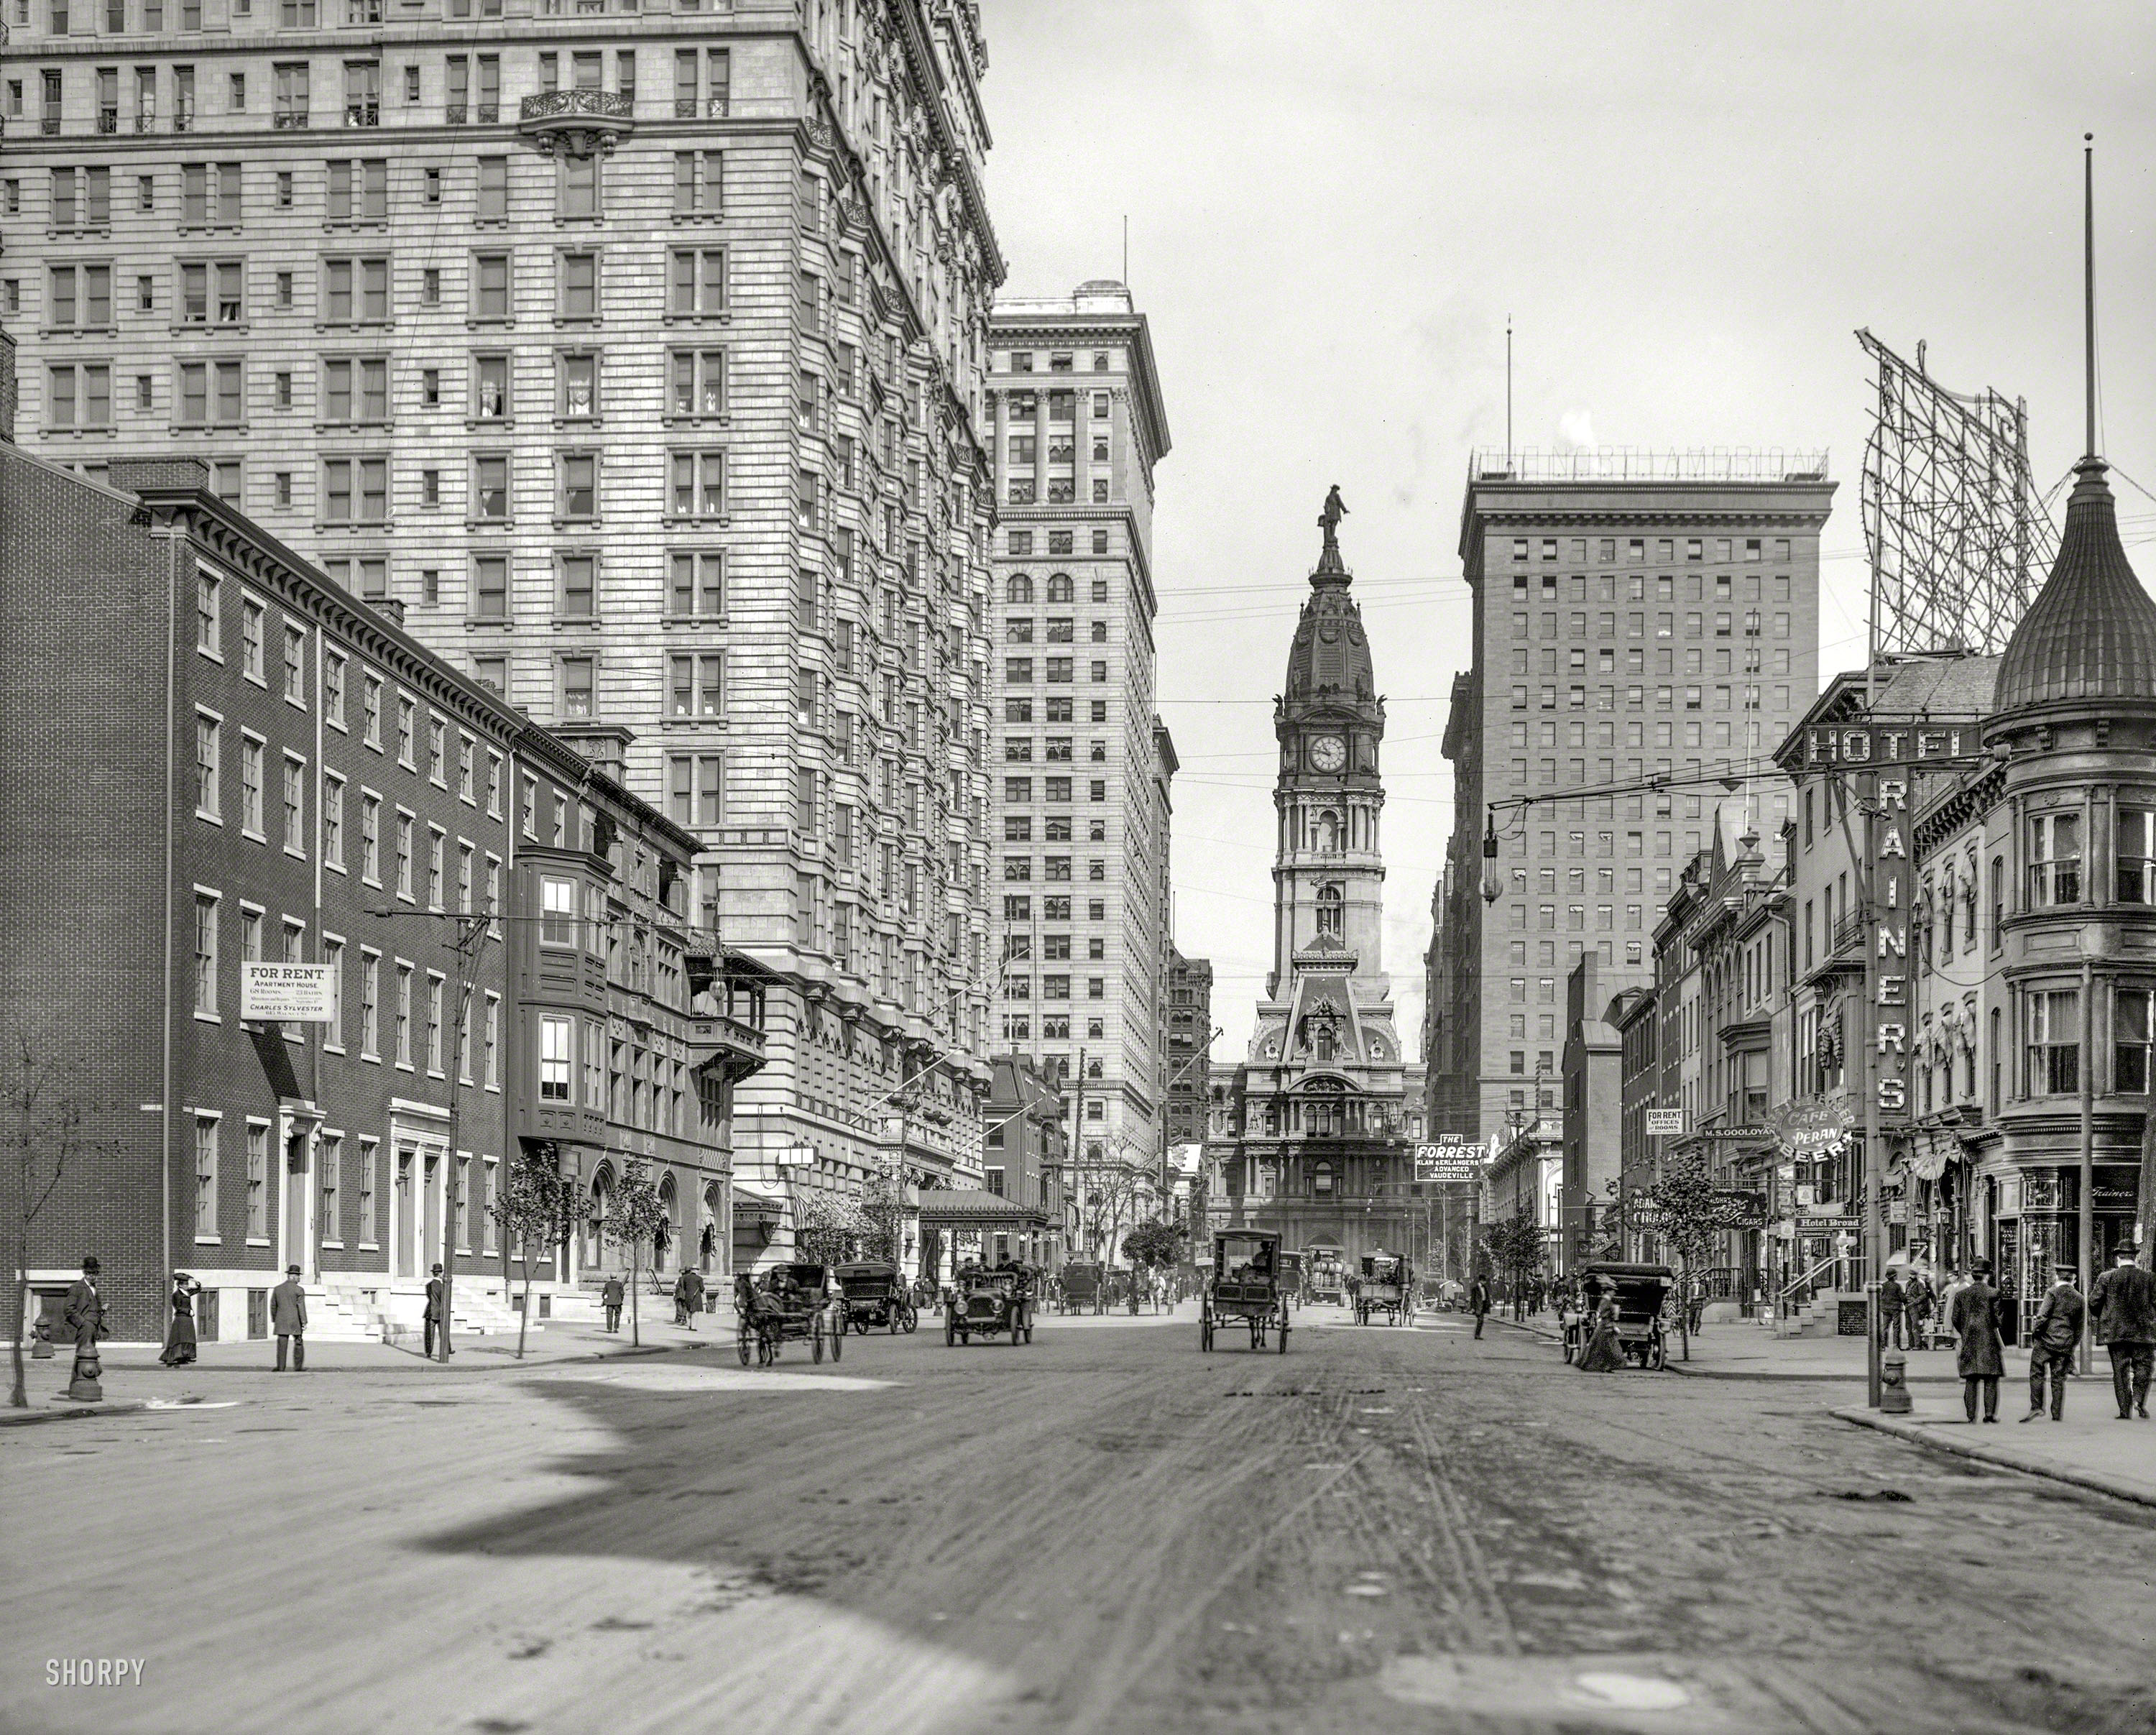 Philadelphia circa 1907. "Broad Street north from Locust with view of City Hall." 8x10 inch glass negative, Detroit Publishing Company. View full size.